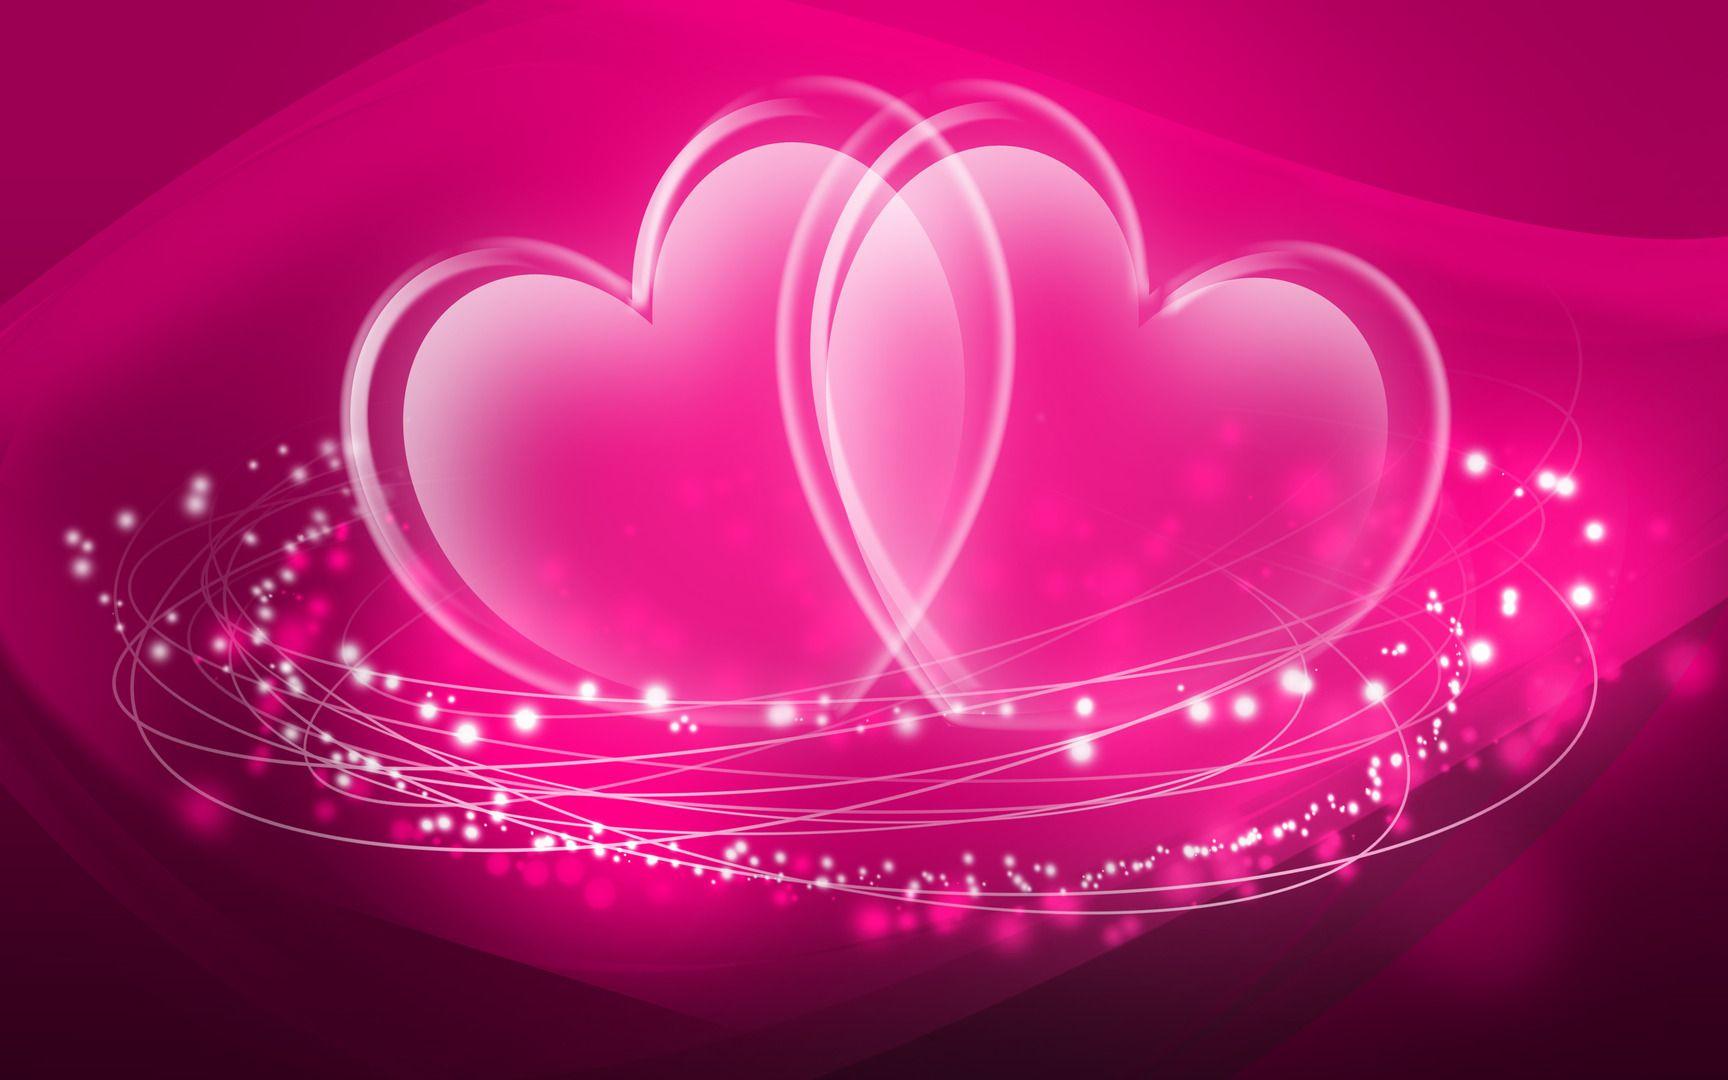 Collection of Colorful Heart Wallpaper on HDWallpaper 1728x1080